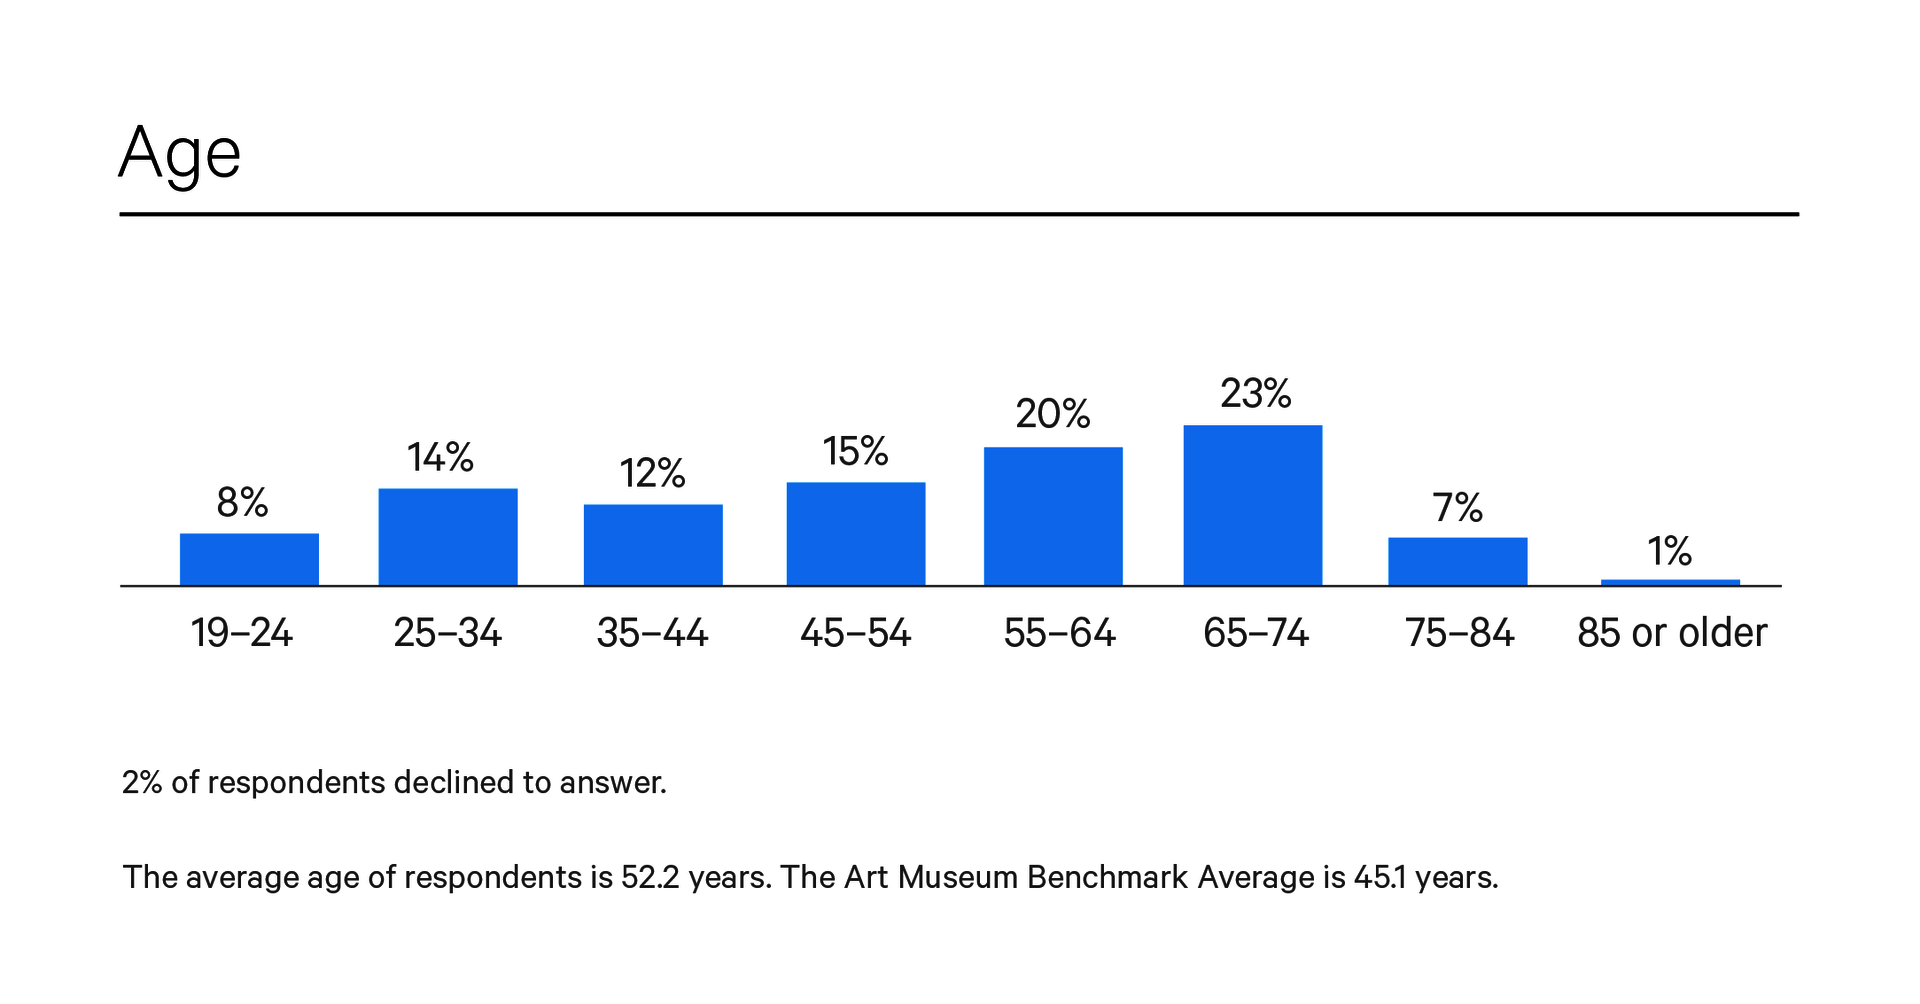 A bar graph titled “Age”, showing that 8% of respondents are 19-24, 14% are 25-34, 12% are 35-44, 15% are 45-54, 20% are 55-64, 23% are 65-74, 7% are 75-84, and 1% are 85 or older. Below the graph reads “2% of respondents declined to answer. The average age of respondents is 52.2 years. The Art Museum Benchmark Average is 45.1 years”. 